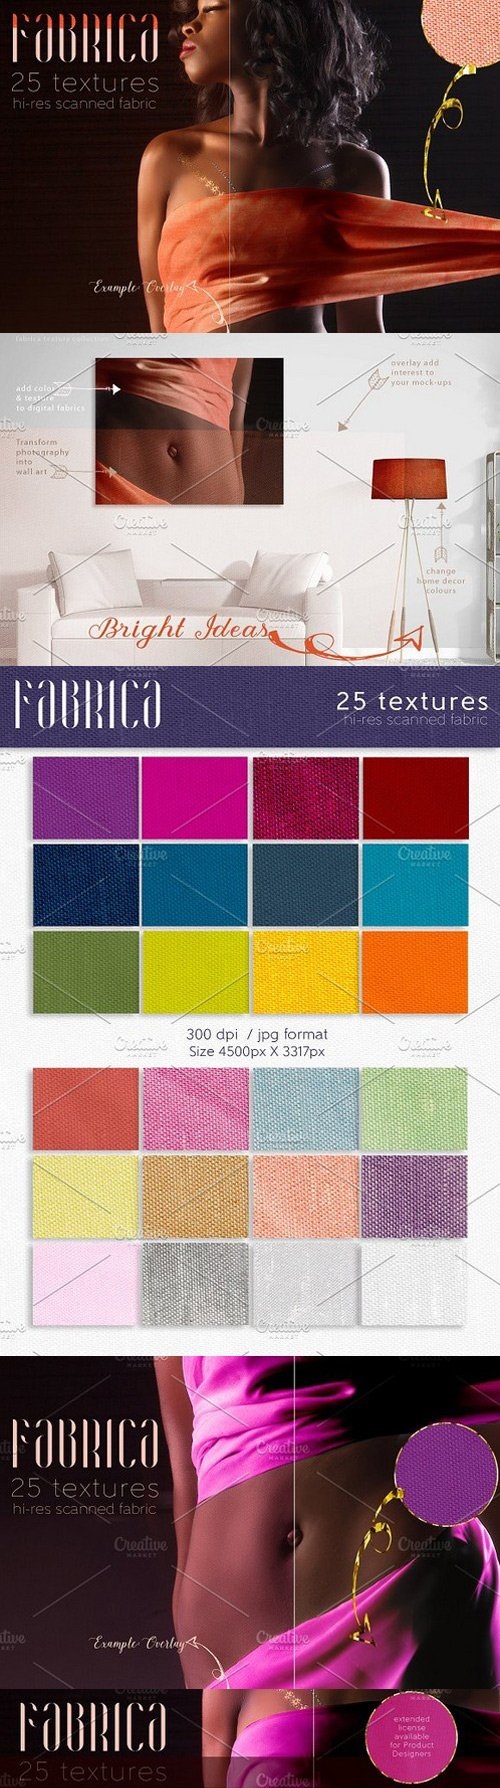 Fabrica Texture Overlays Collection 1495129